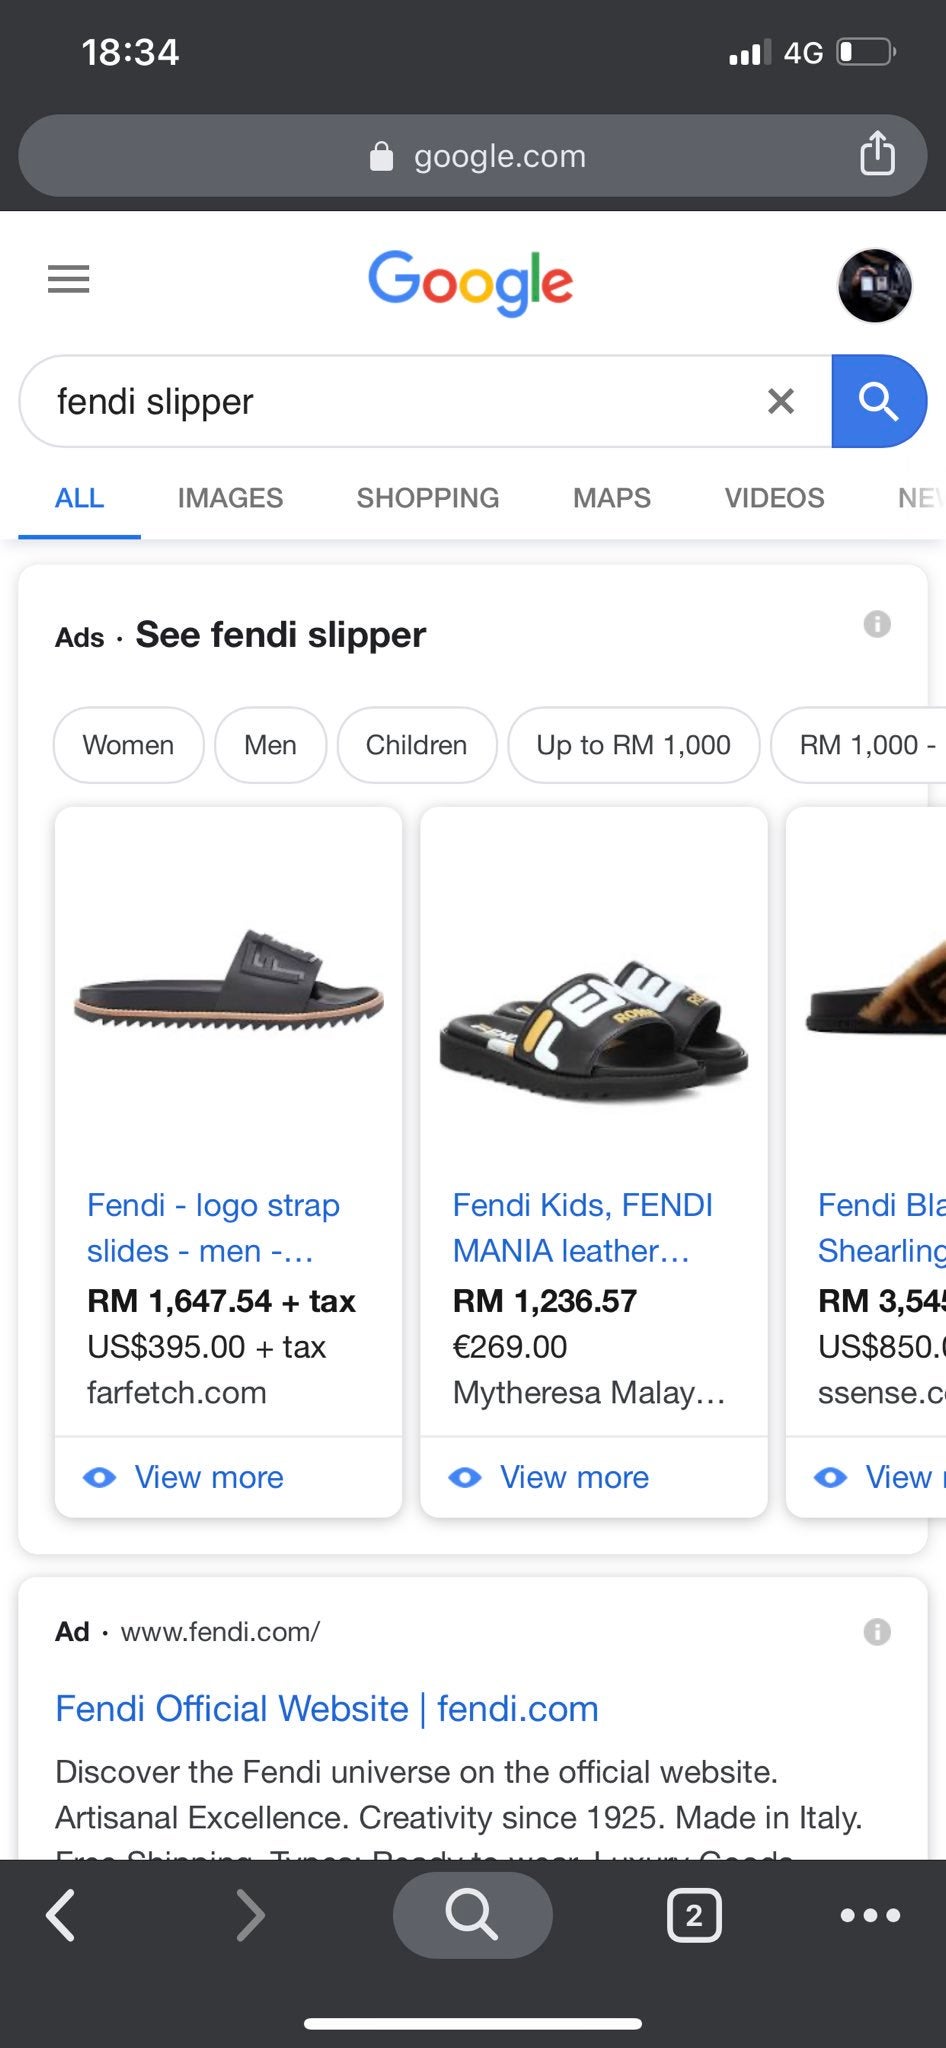 M'sian Man Needed to Pray, Hires Friend To Take Care Of His RM1k+ Fendi Slippers - WORLD OF BUZZ 1